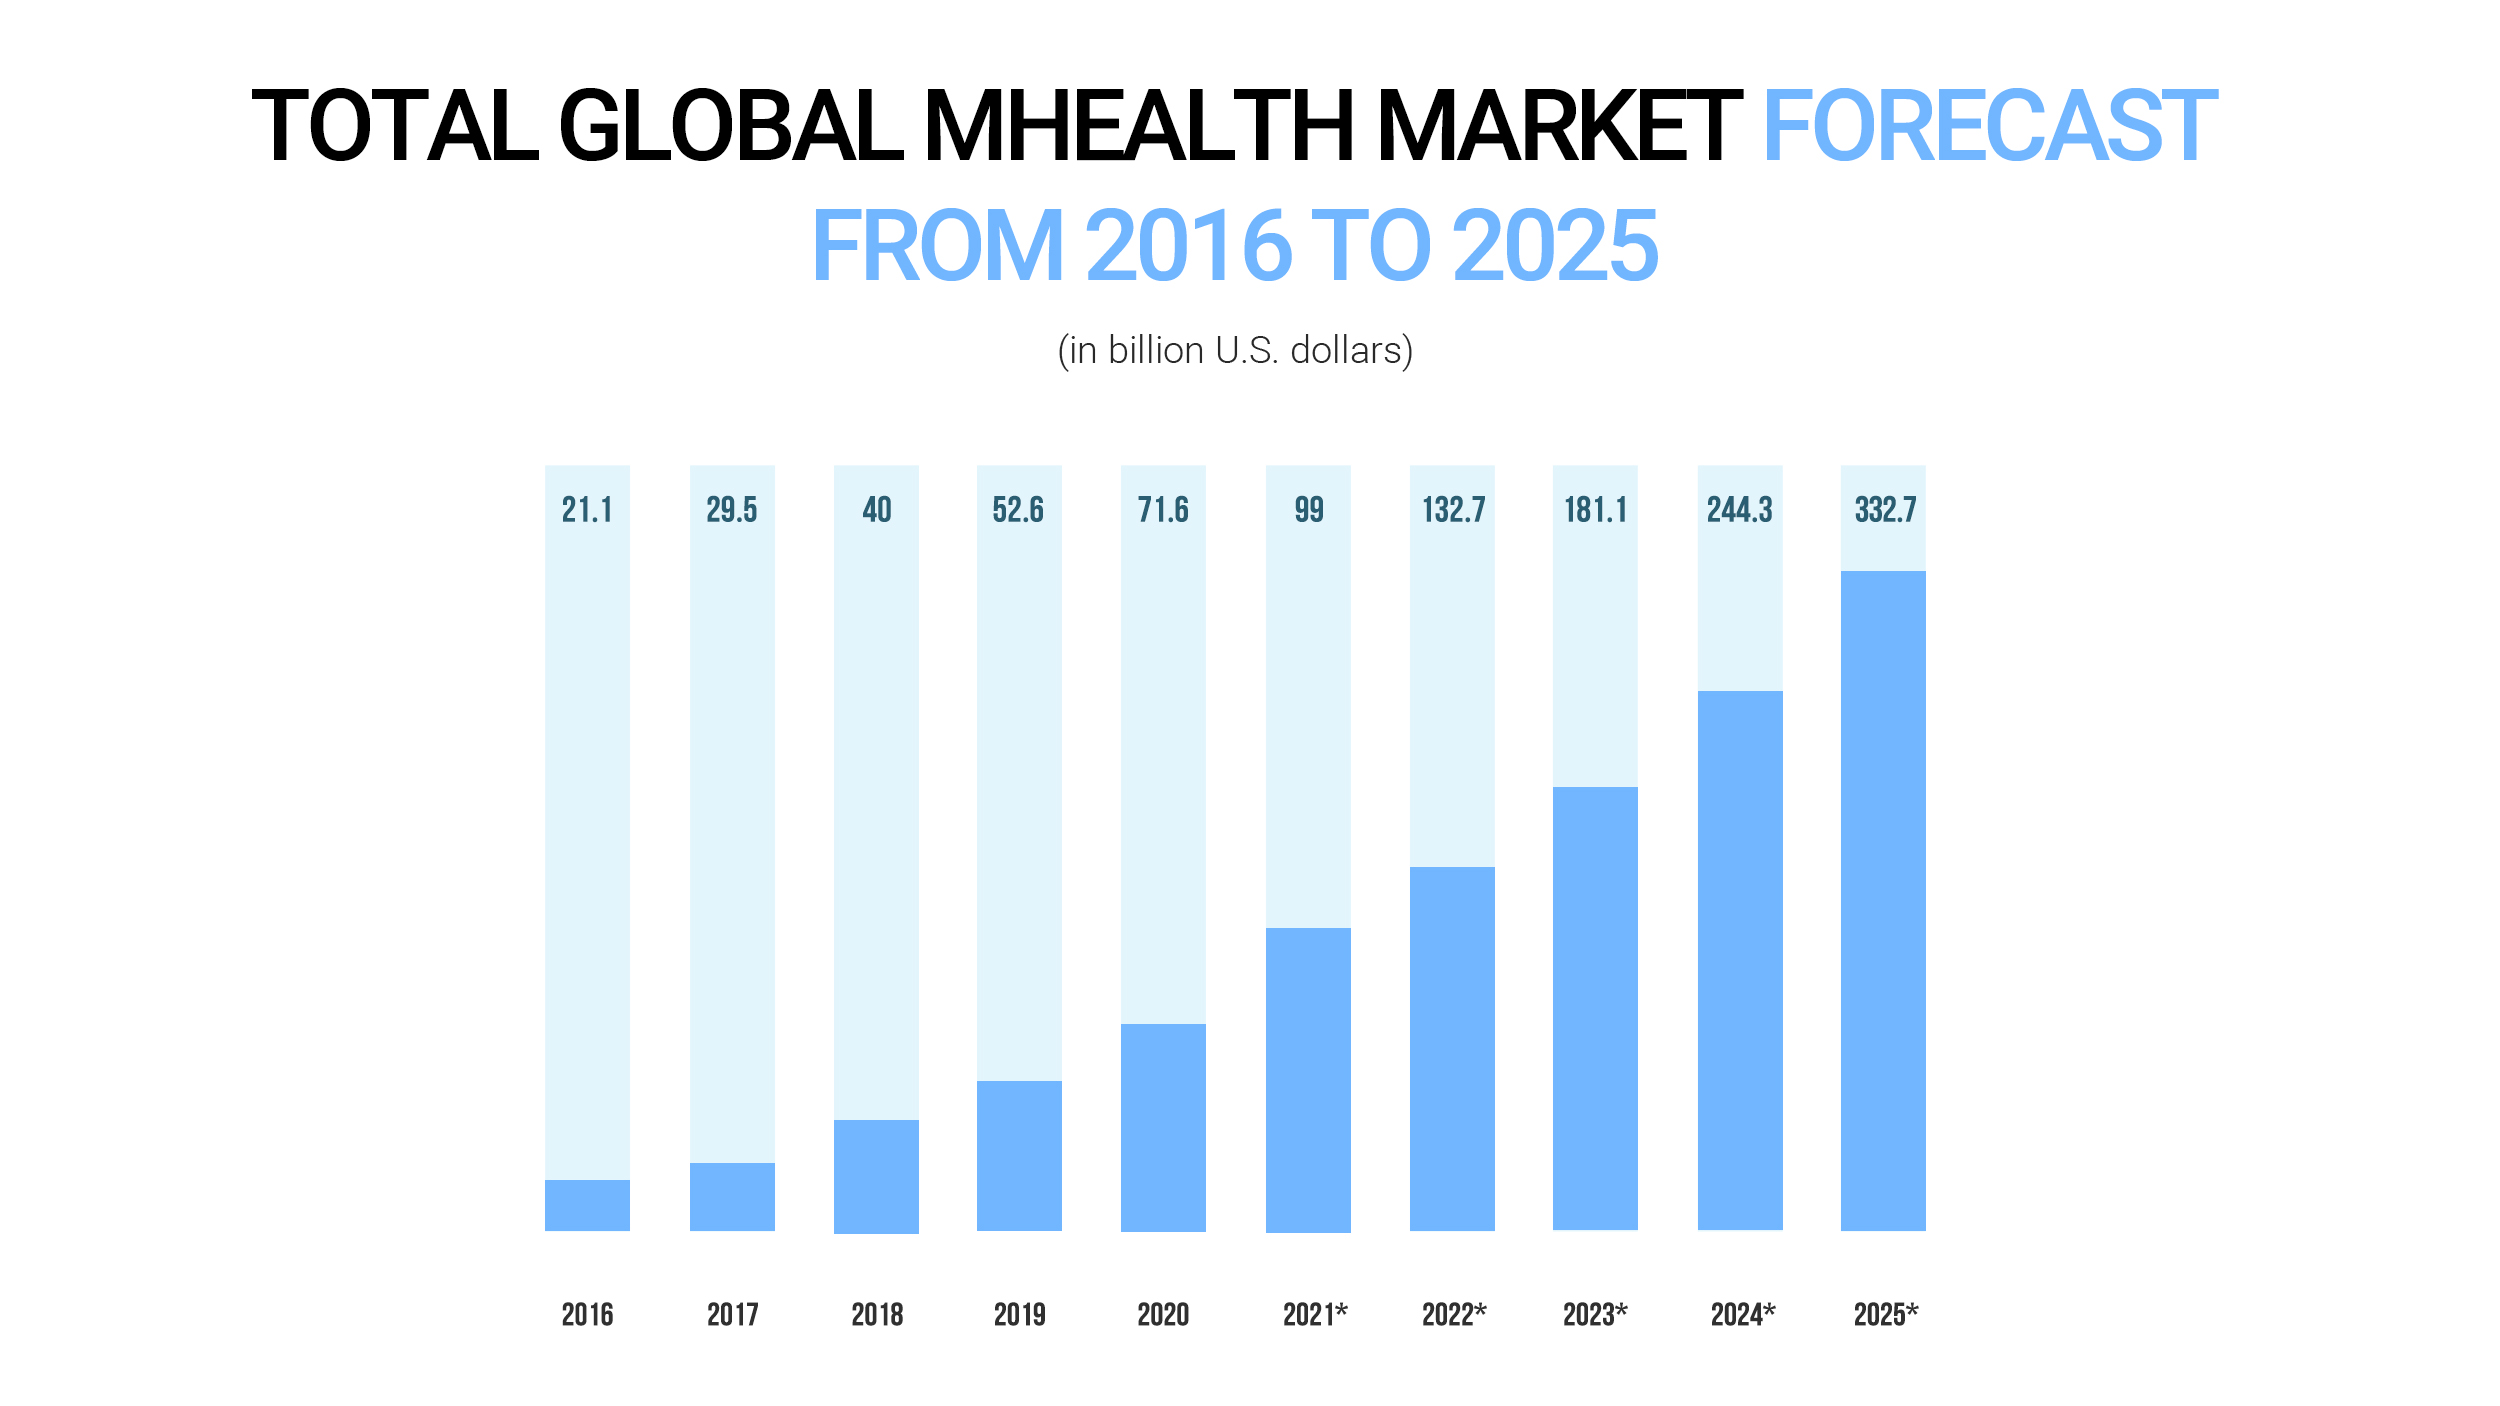 Total mhealth market size forecast worldwide 2016-2025